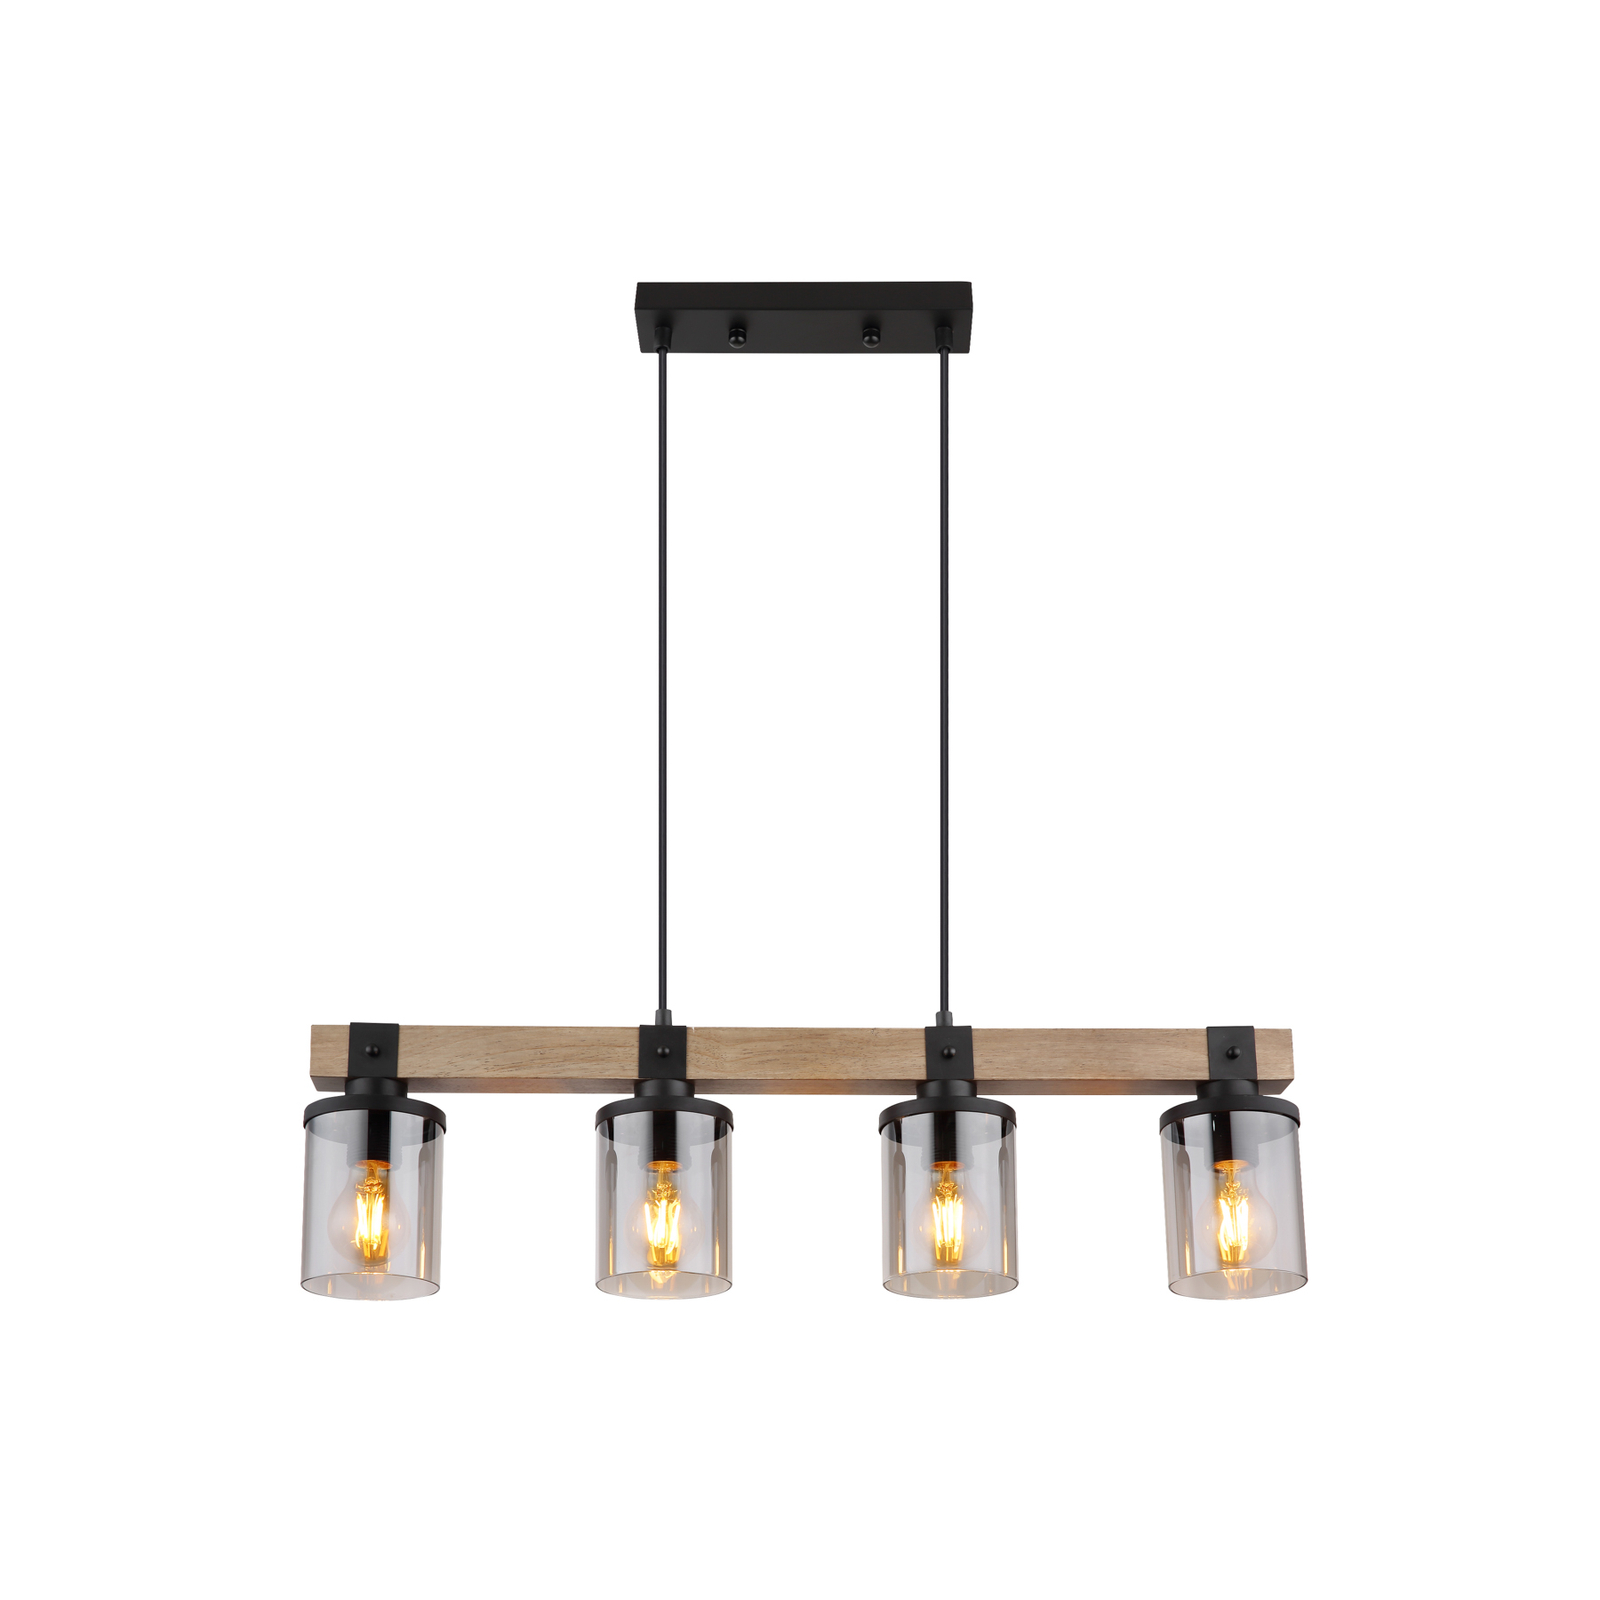 Lila pendant light with a wooden beam, 4-bulb